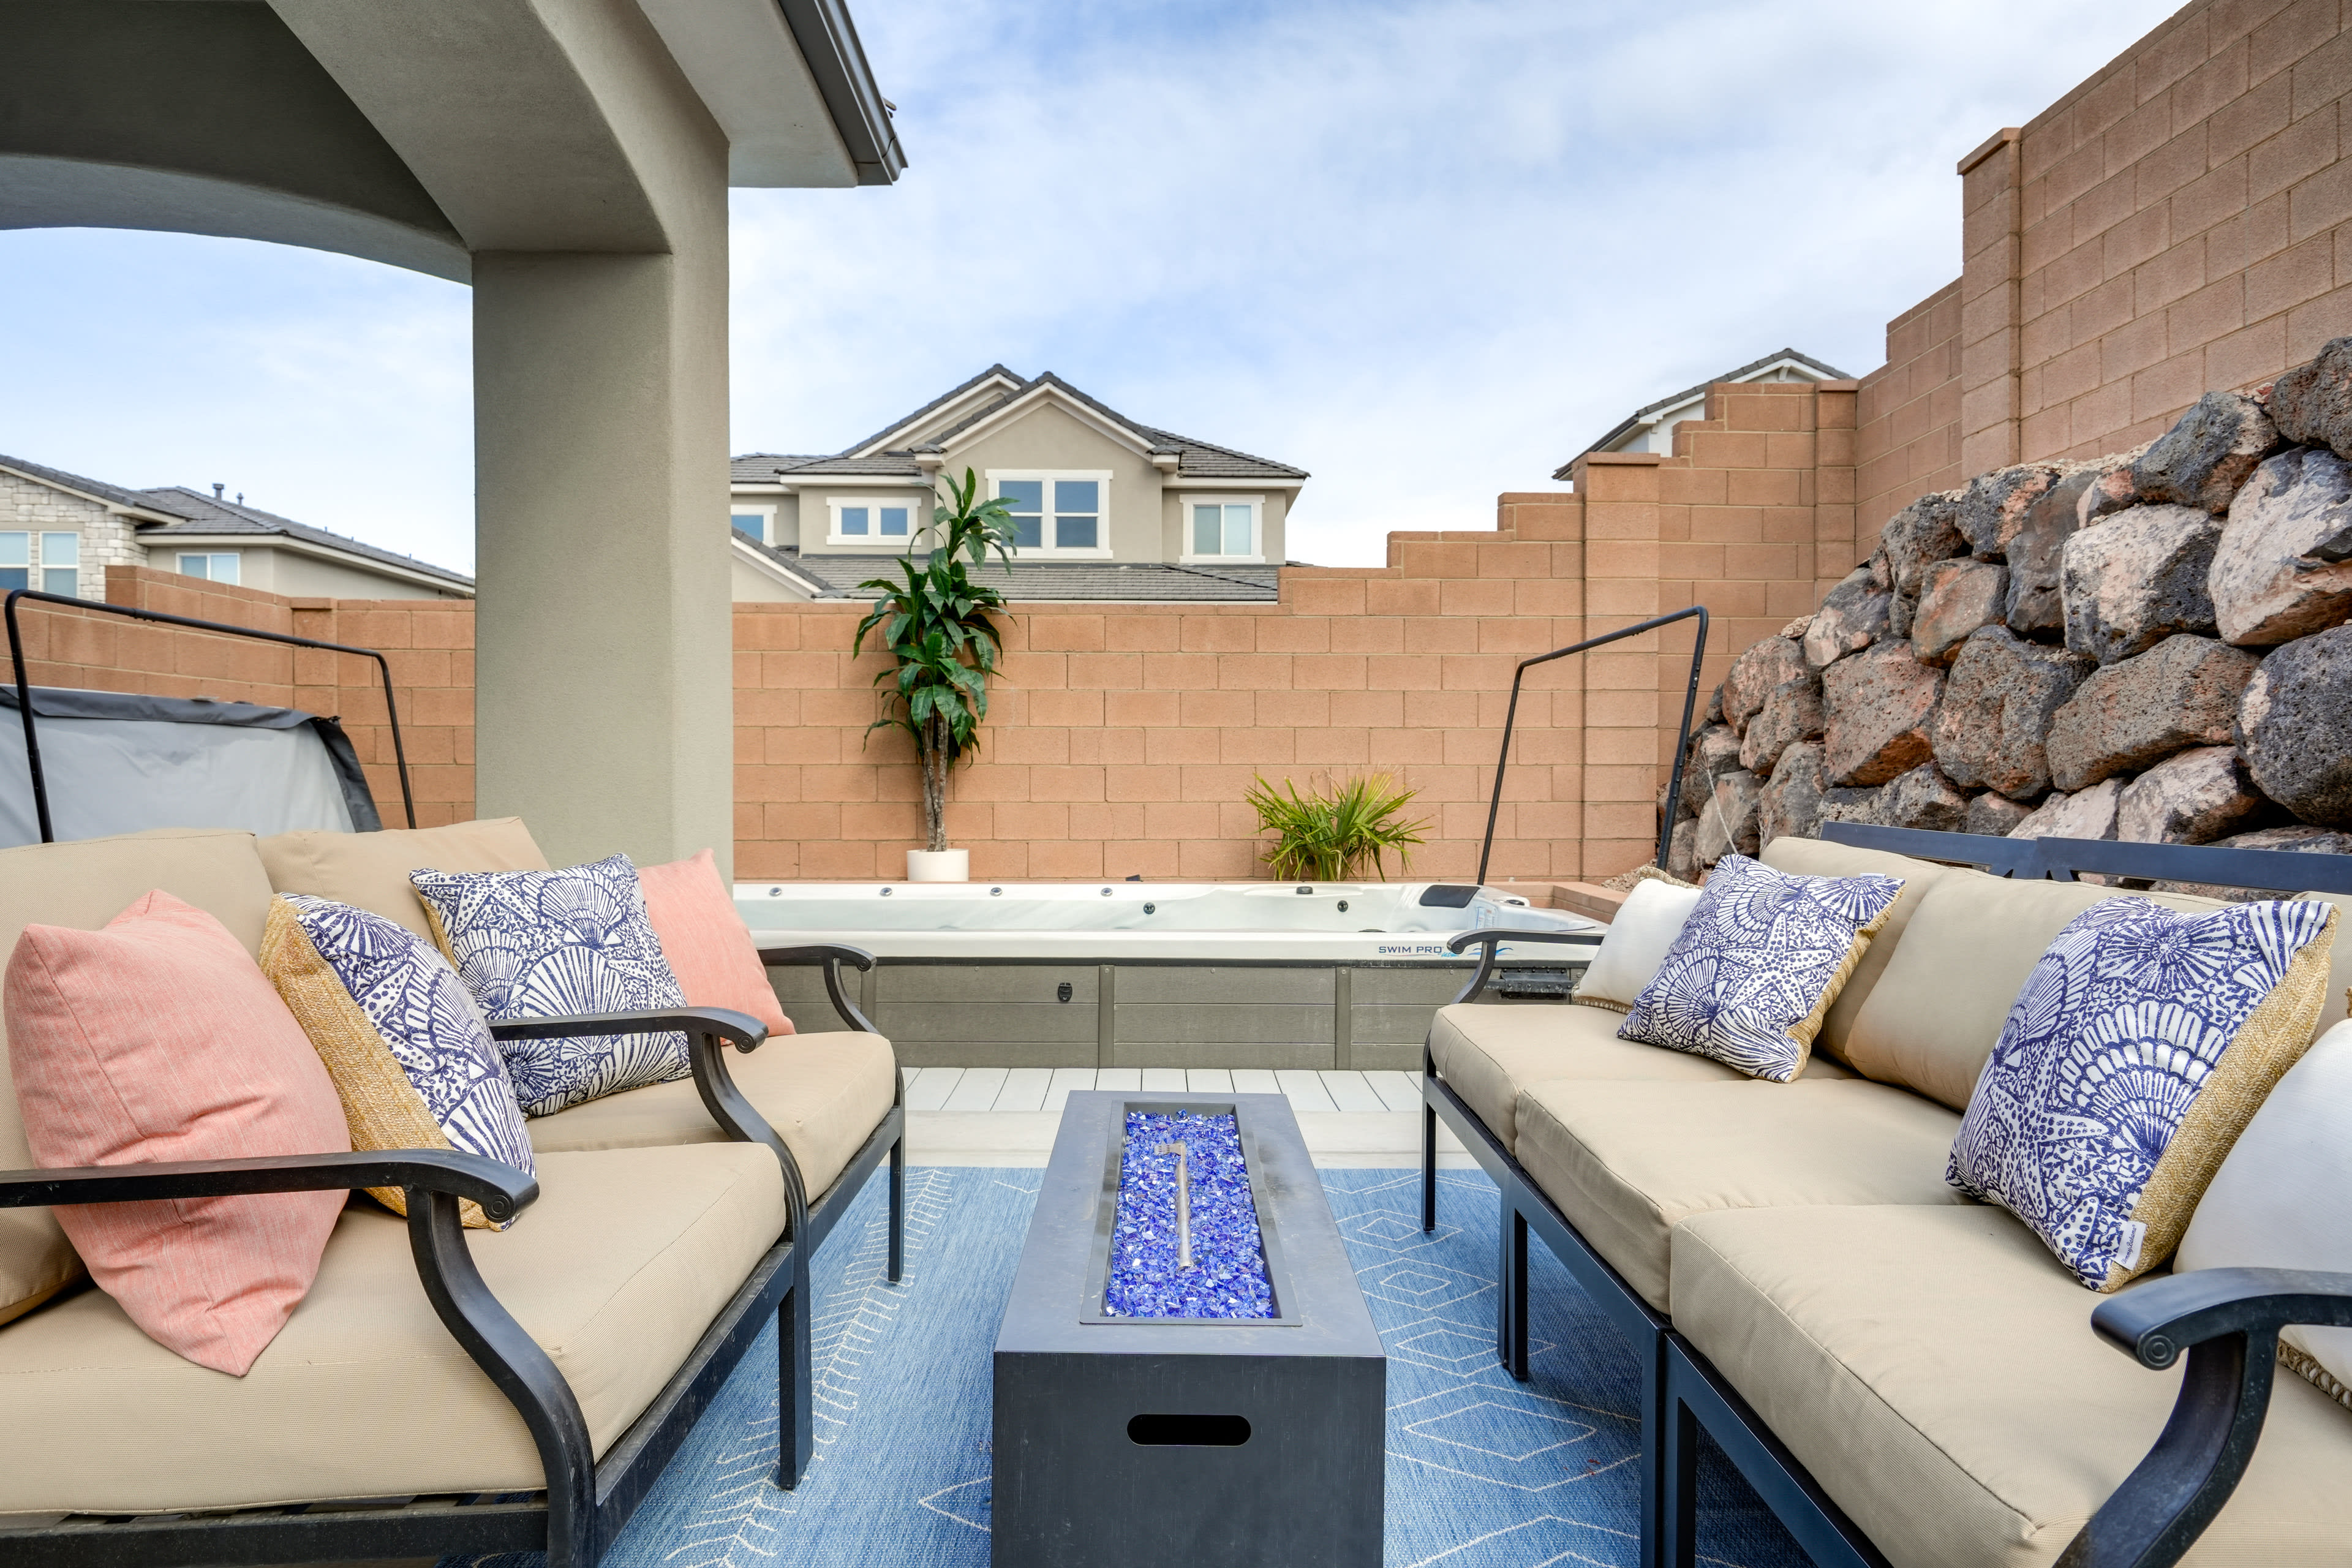 Gas Fire Pit | Patio Seating